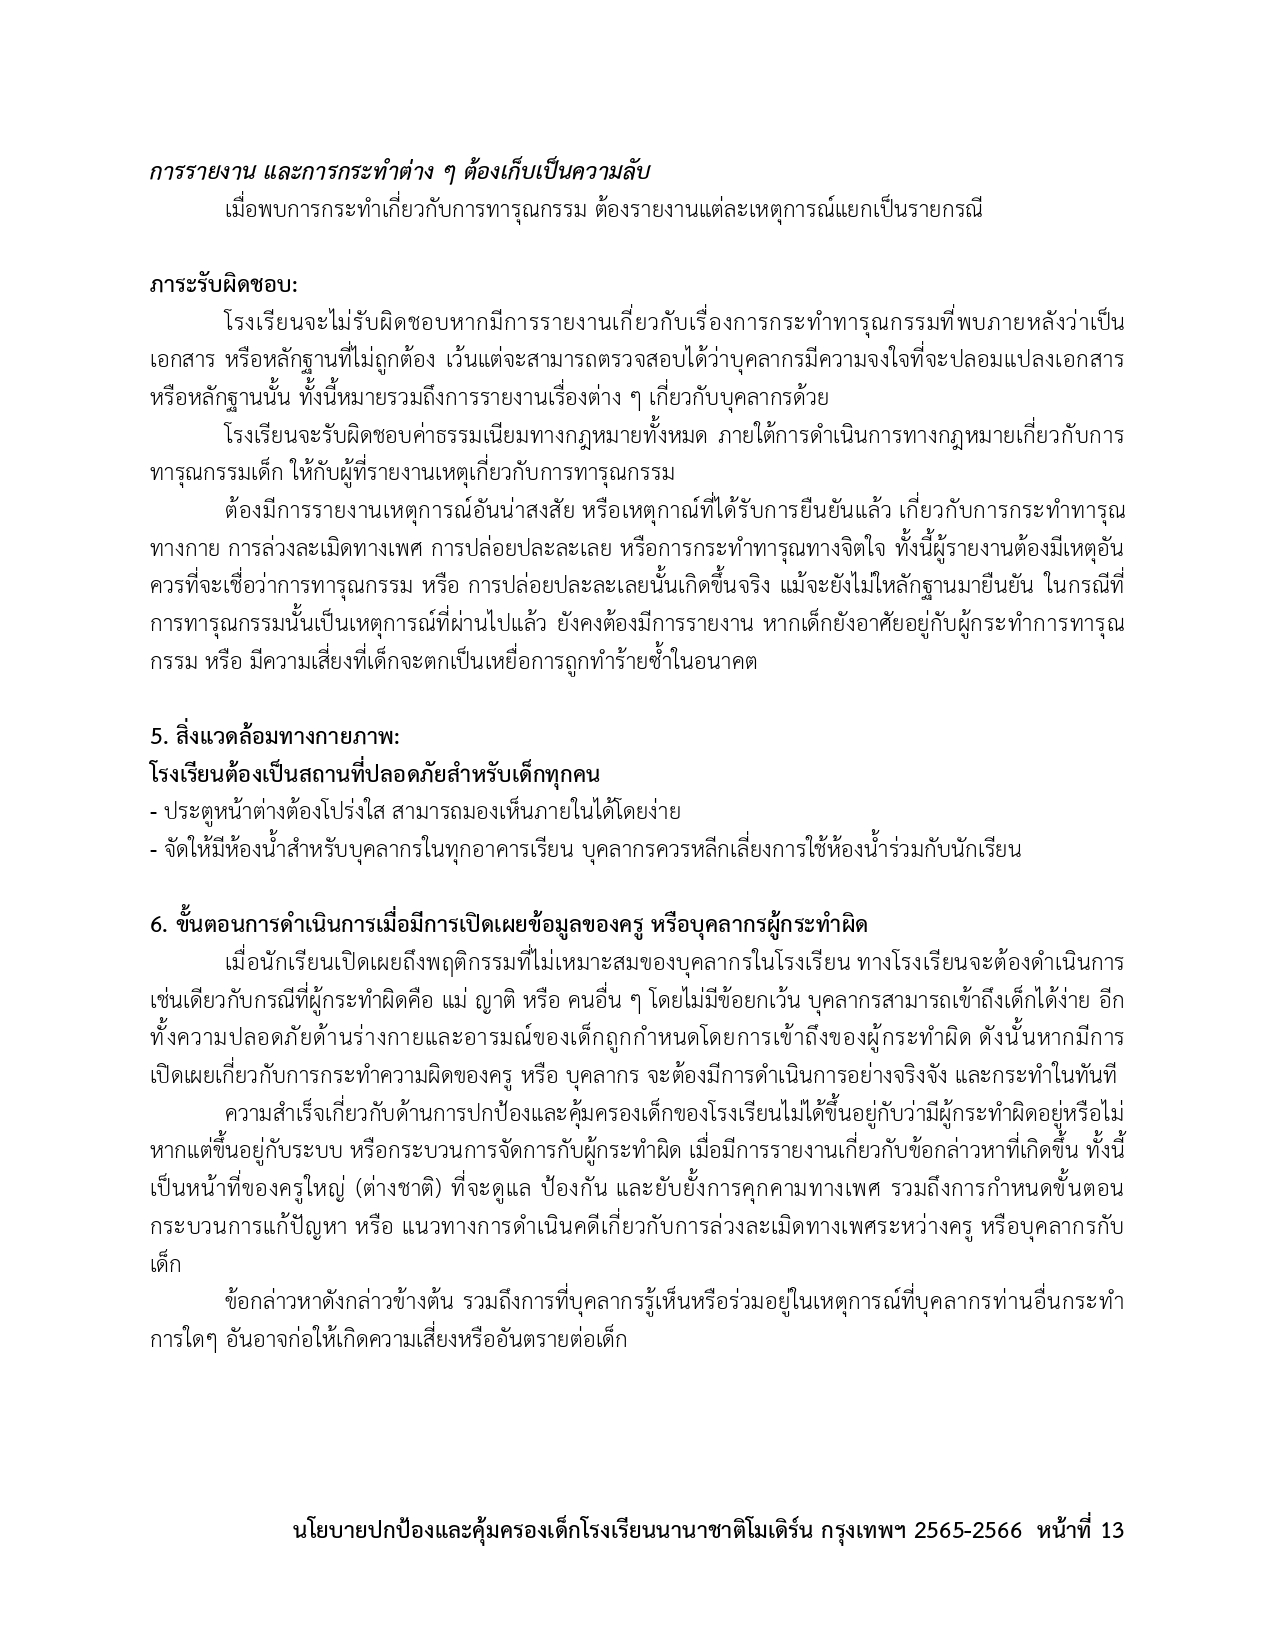 Child Protection Policy Thai Version page 0013